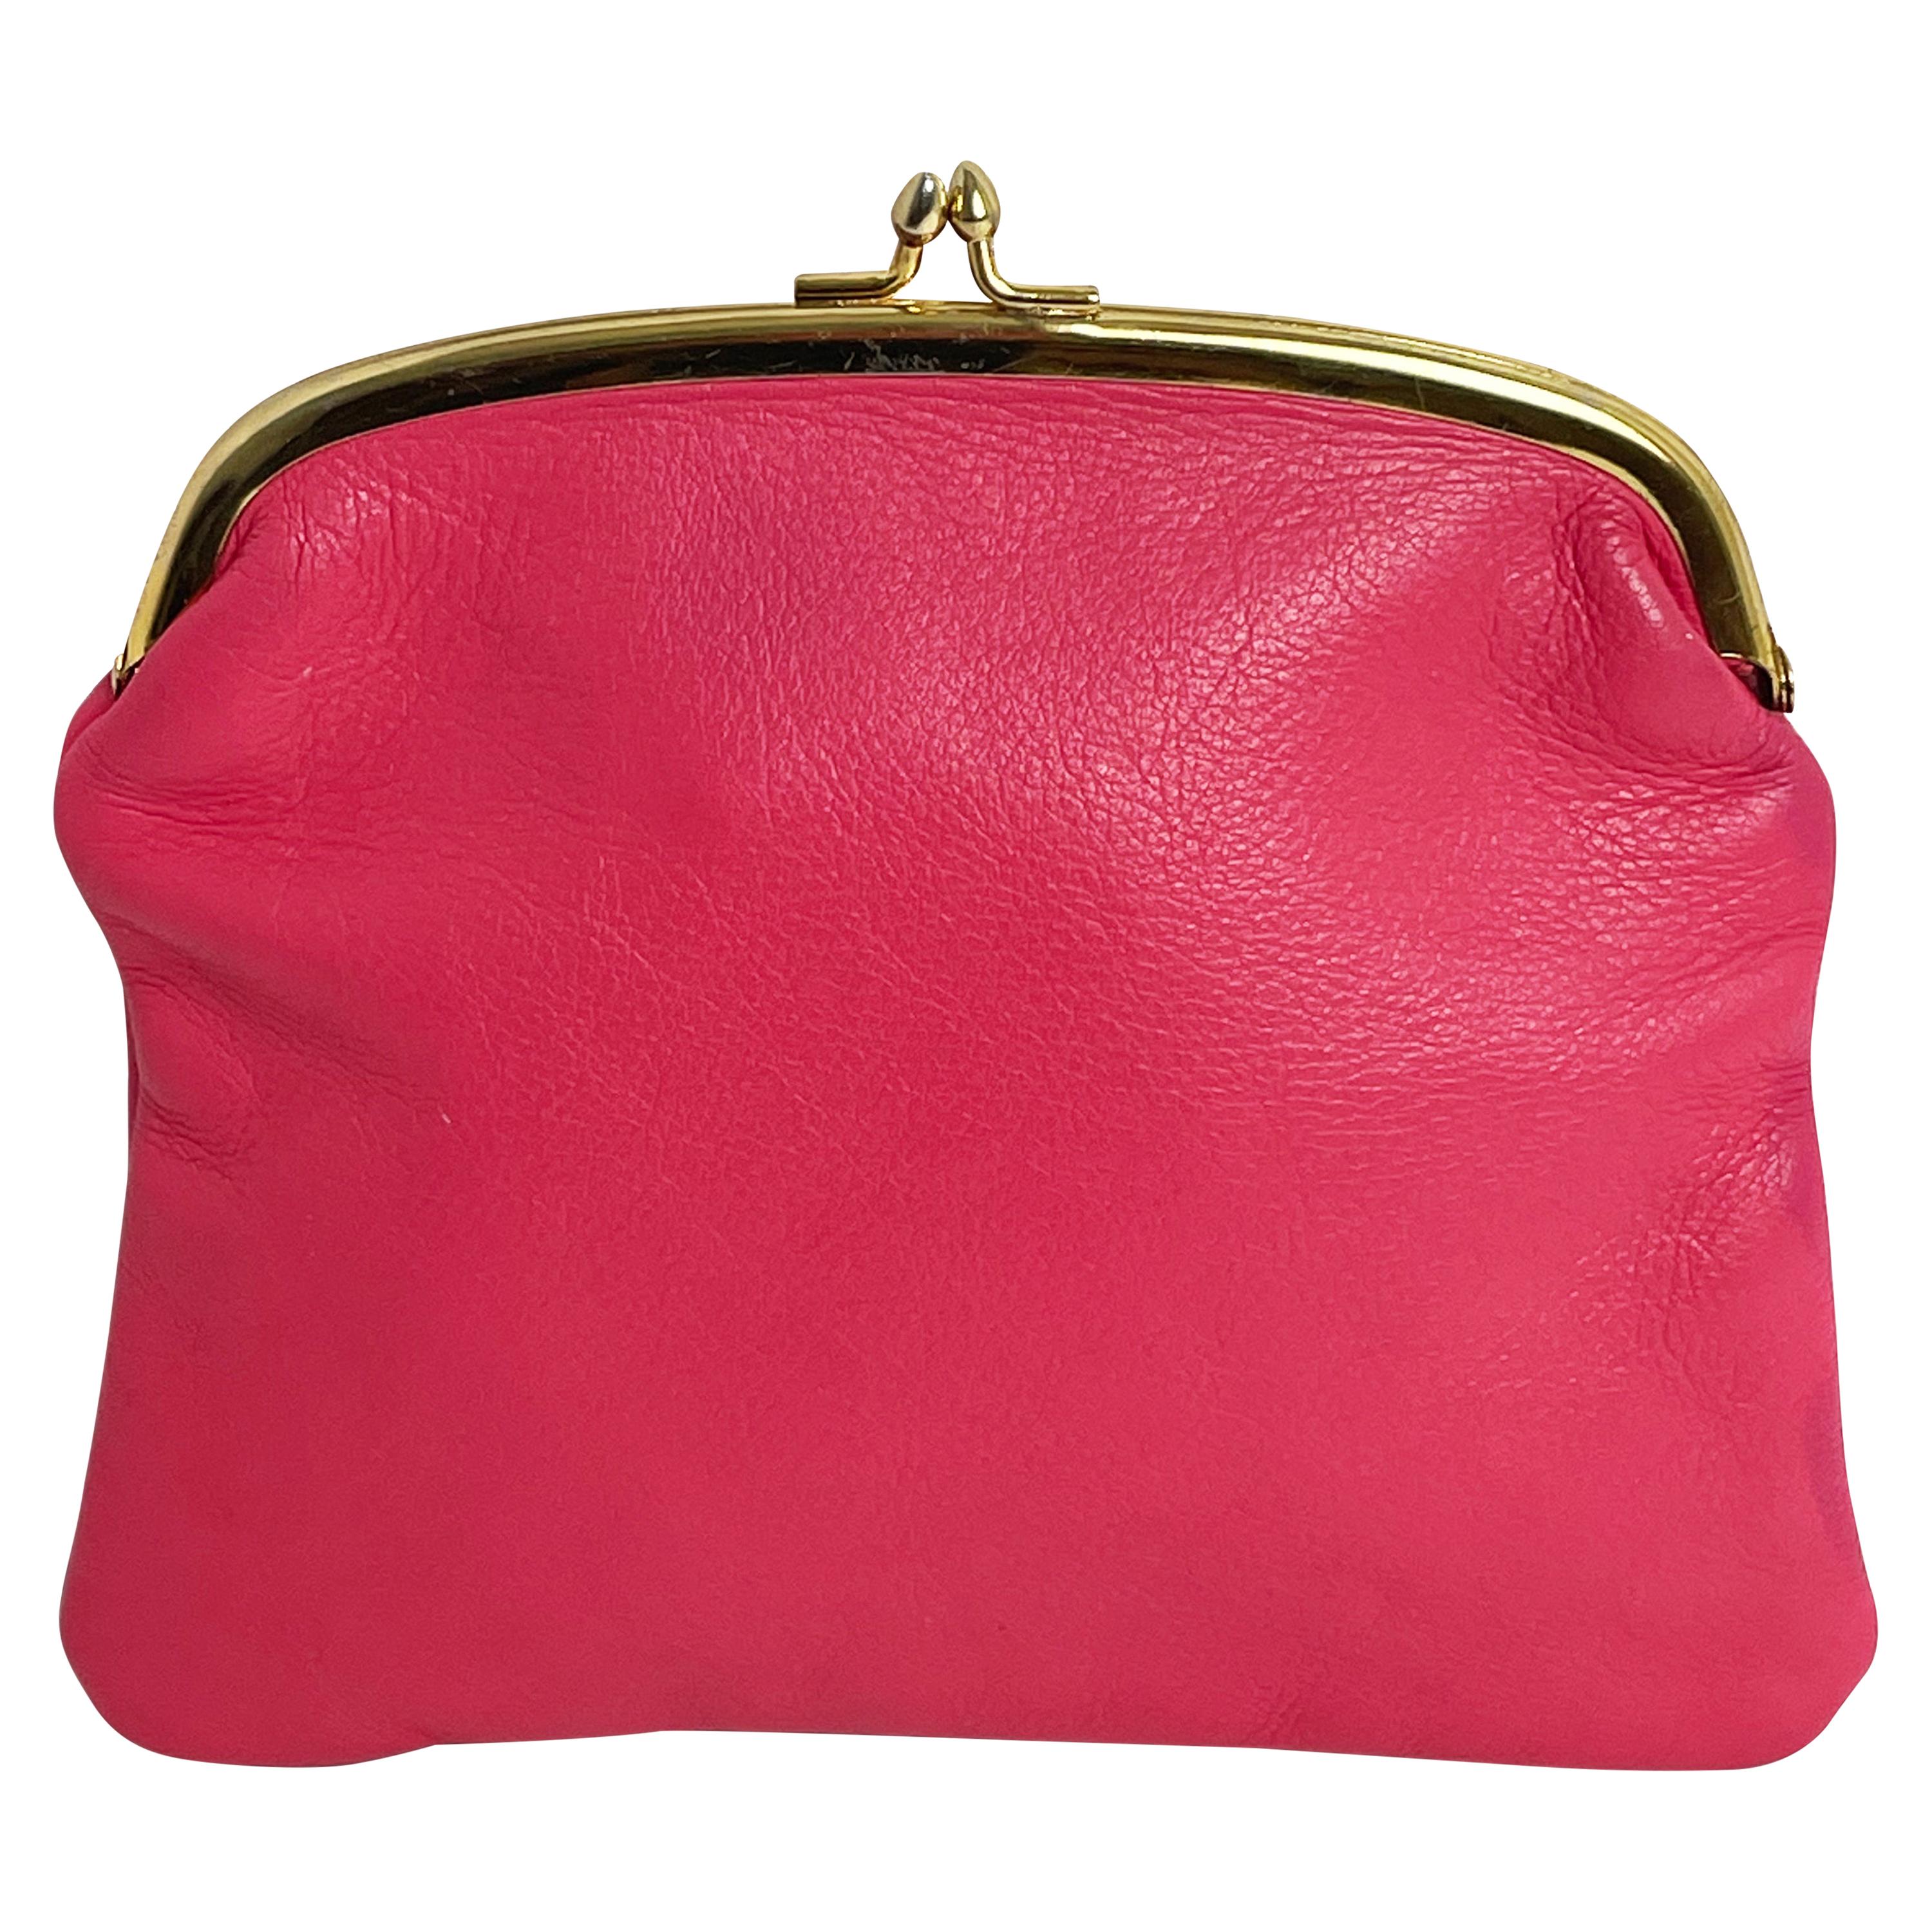 Pink Leather Bags, Handbags & Purses | COACH® Outlet